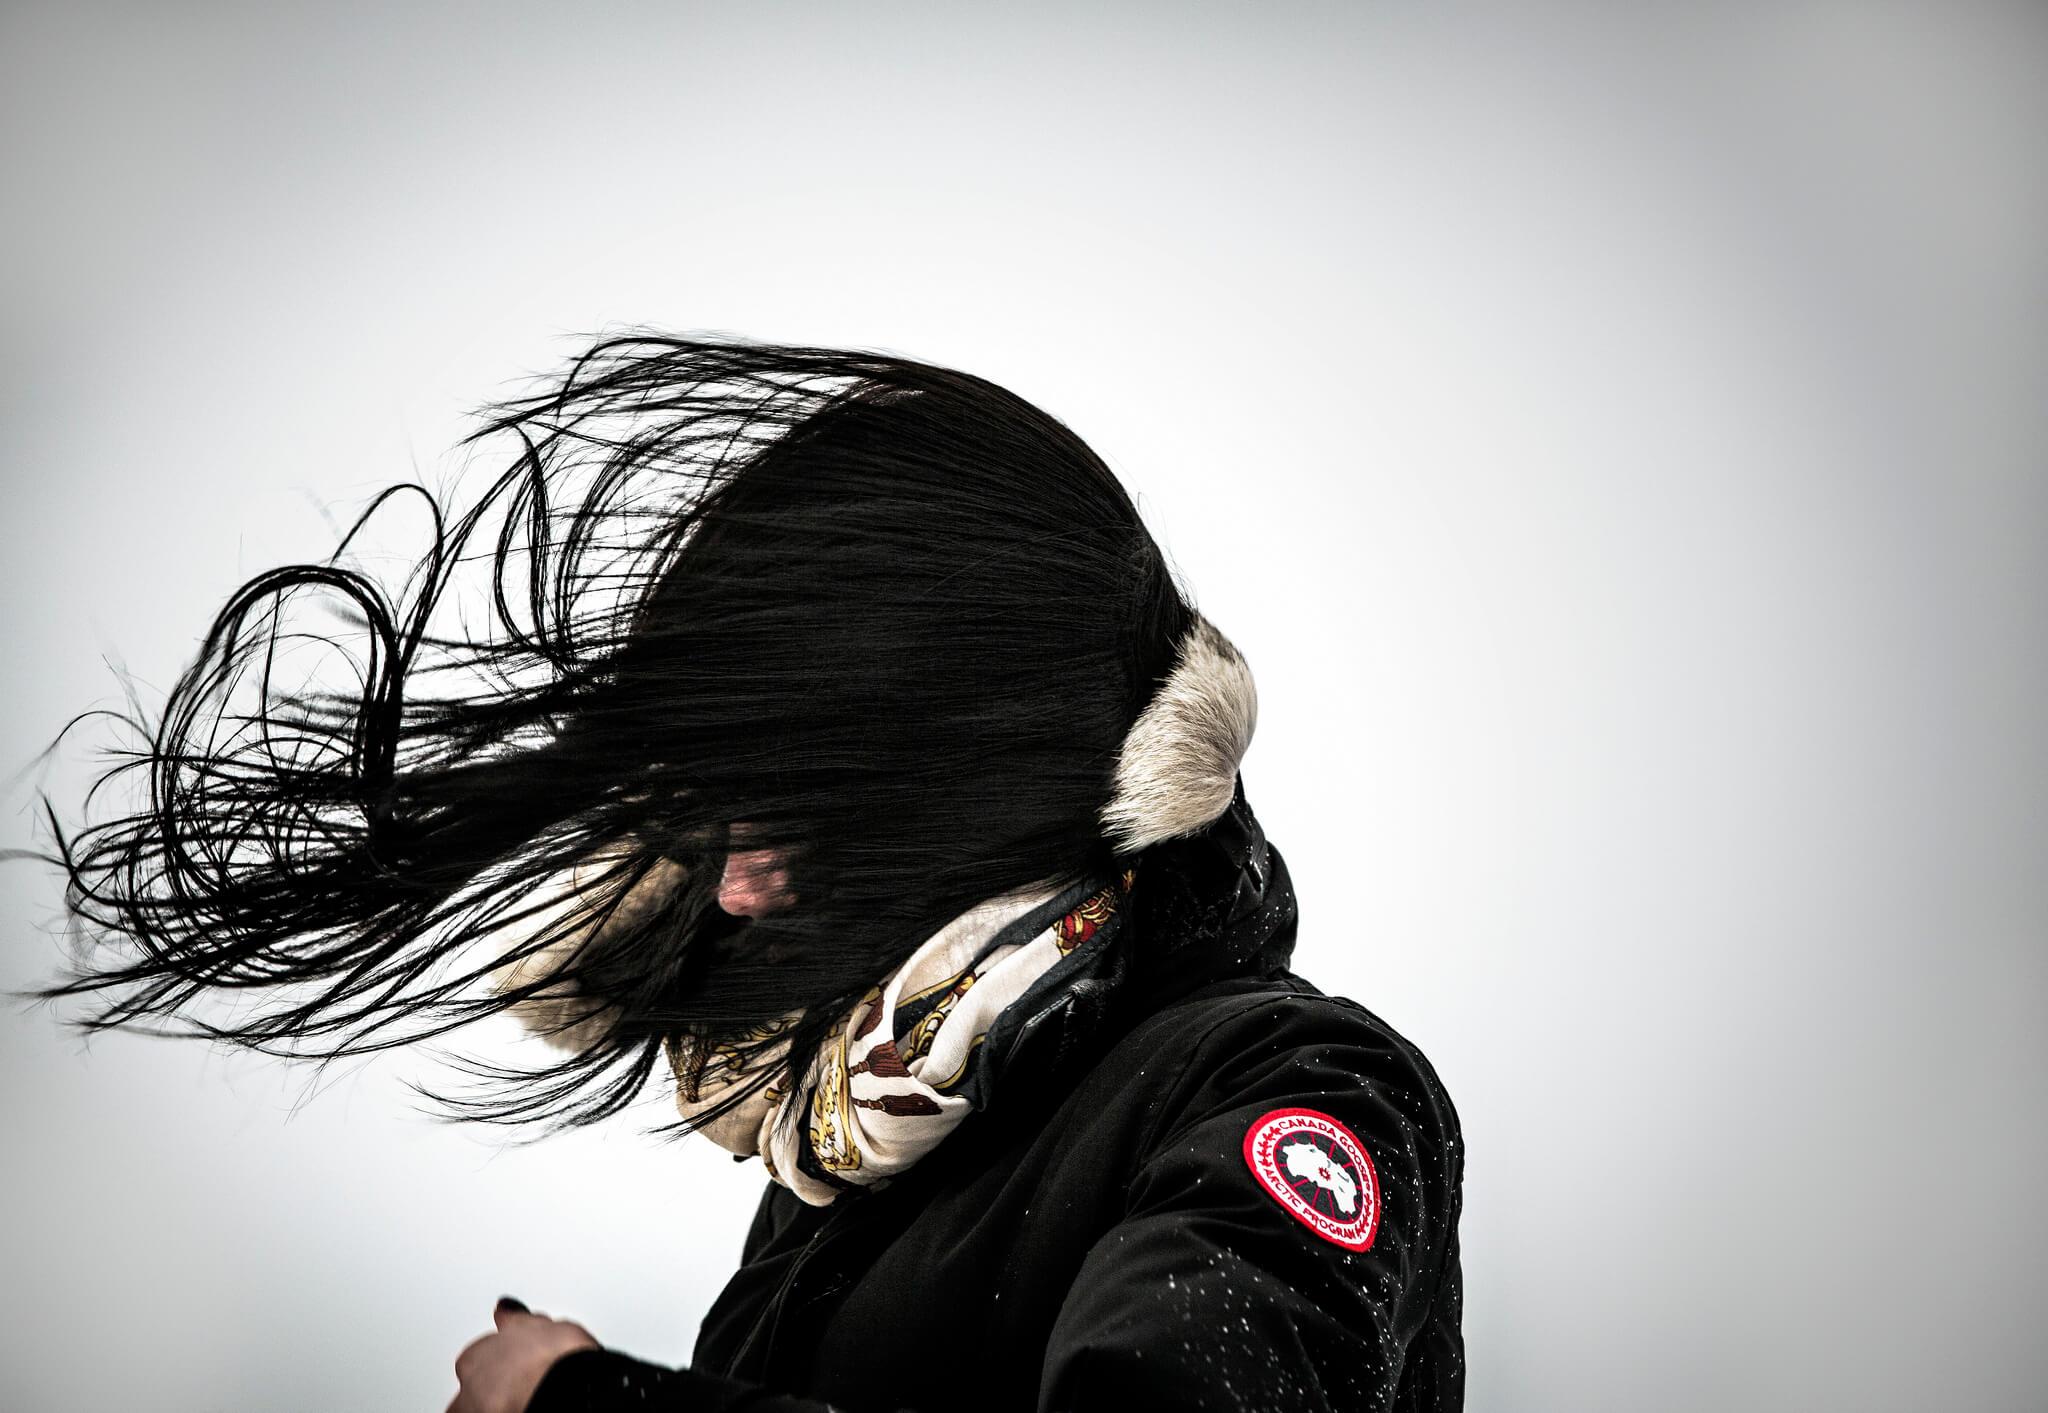 Woman with hair blowing in strong wind in Greenland, by Mads Pihl